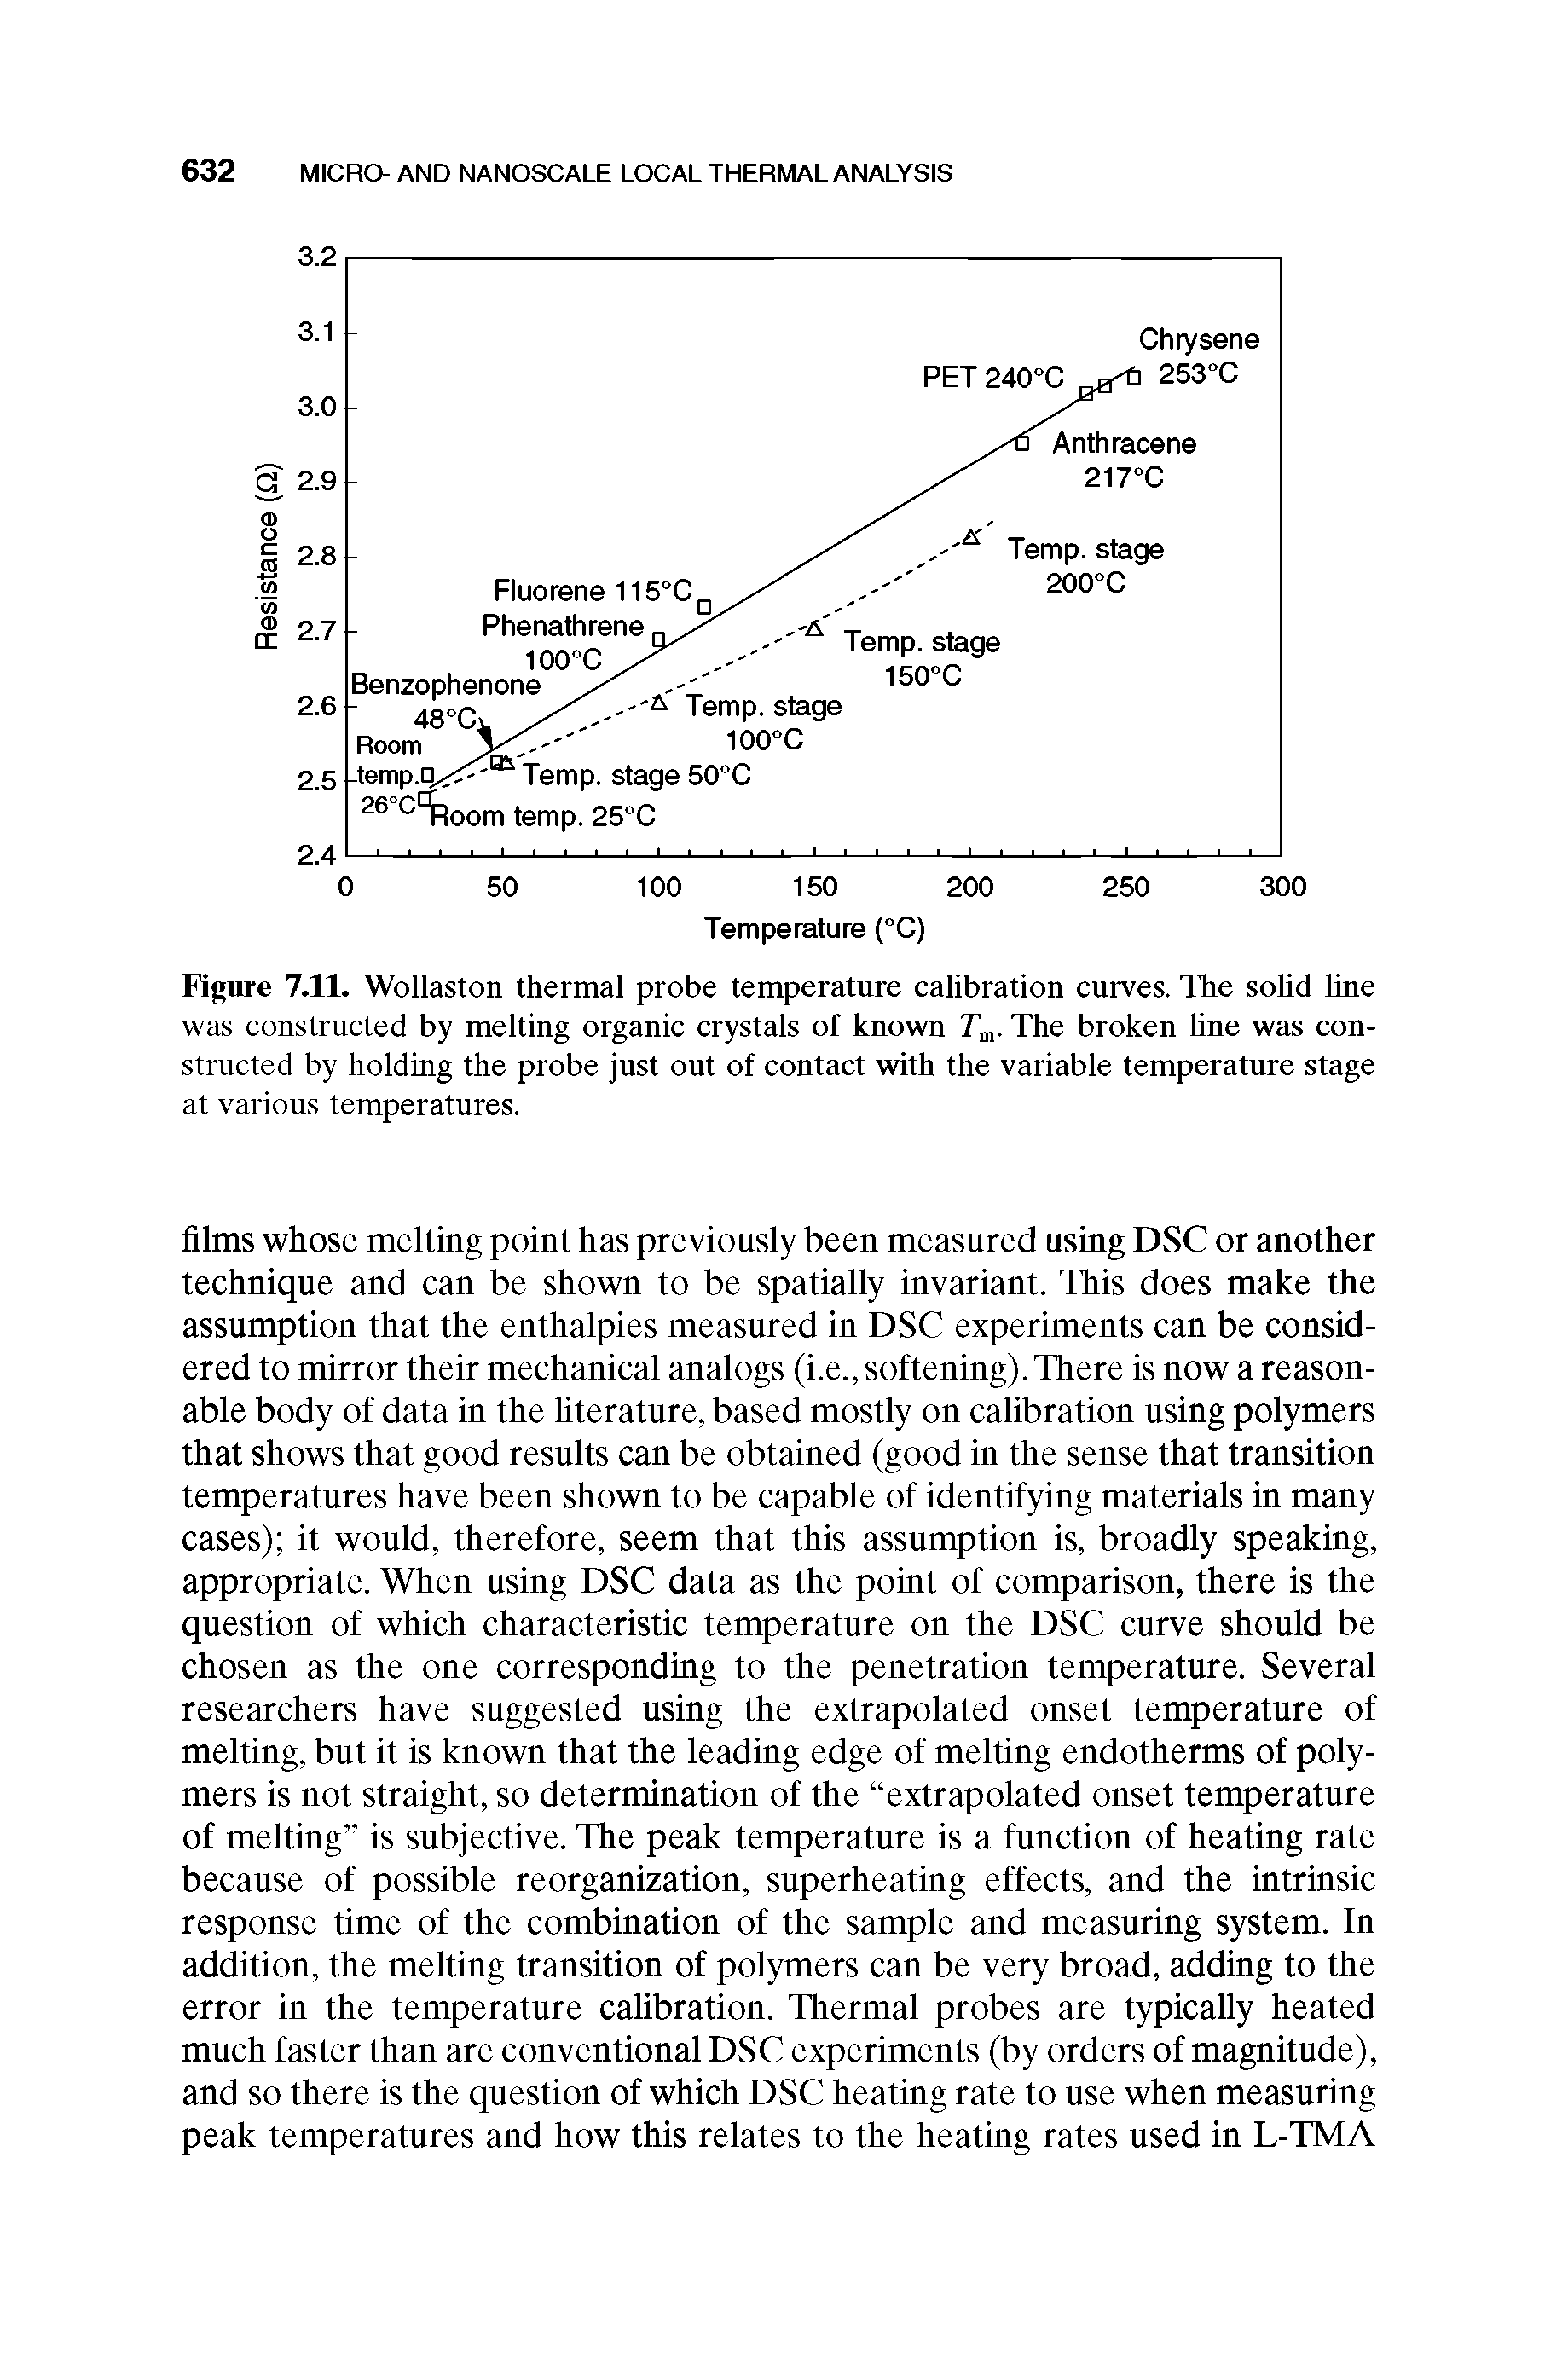 Figure 7.11. Wollaston thermal probe temperature calibration curves. The soUd line was constructed by melting organic crystals of known T. The broken Une was constructed by holding the probe just out of contact with the variable temperature stage at various temperatures.